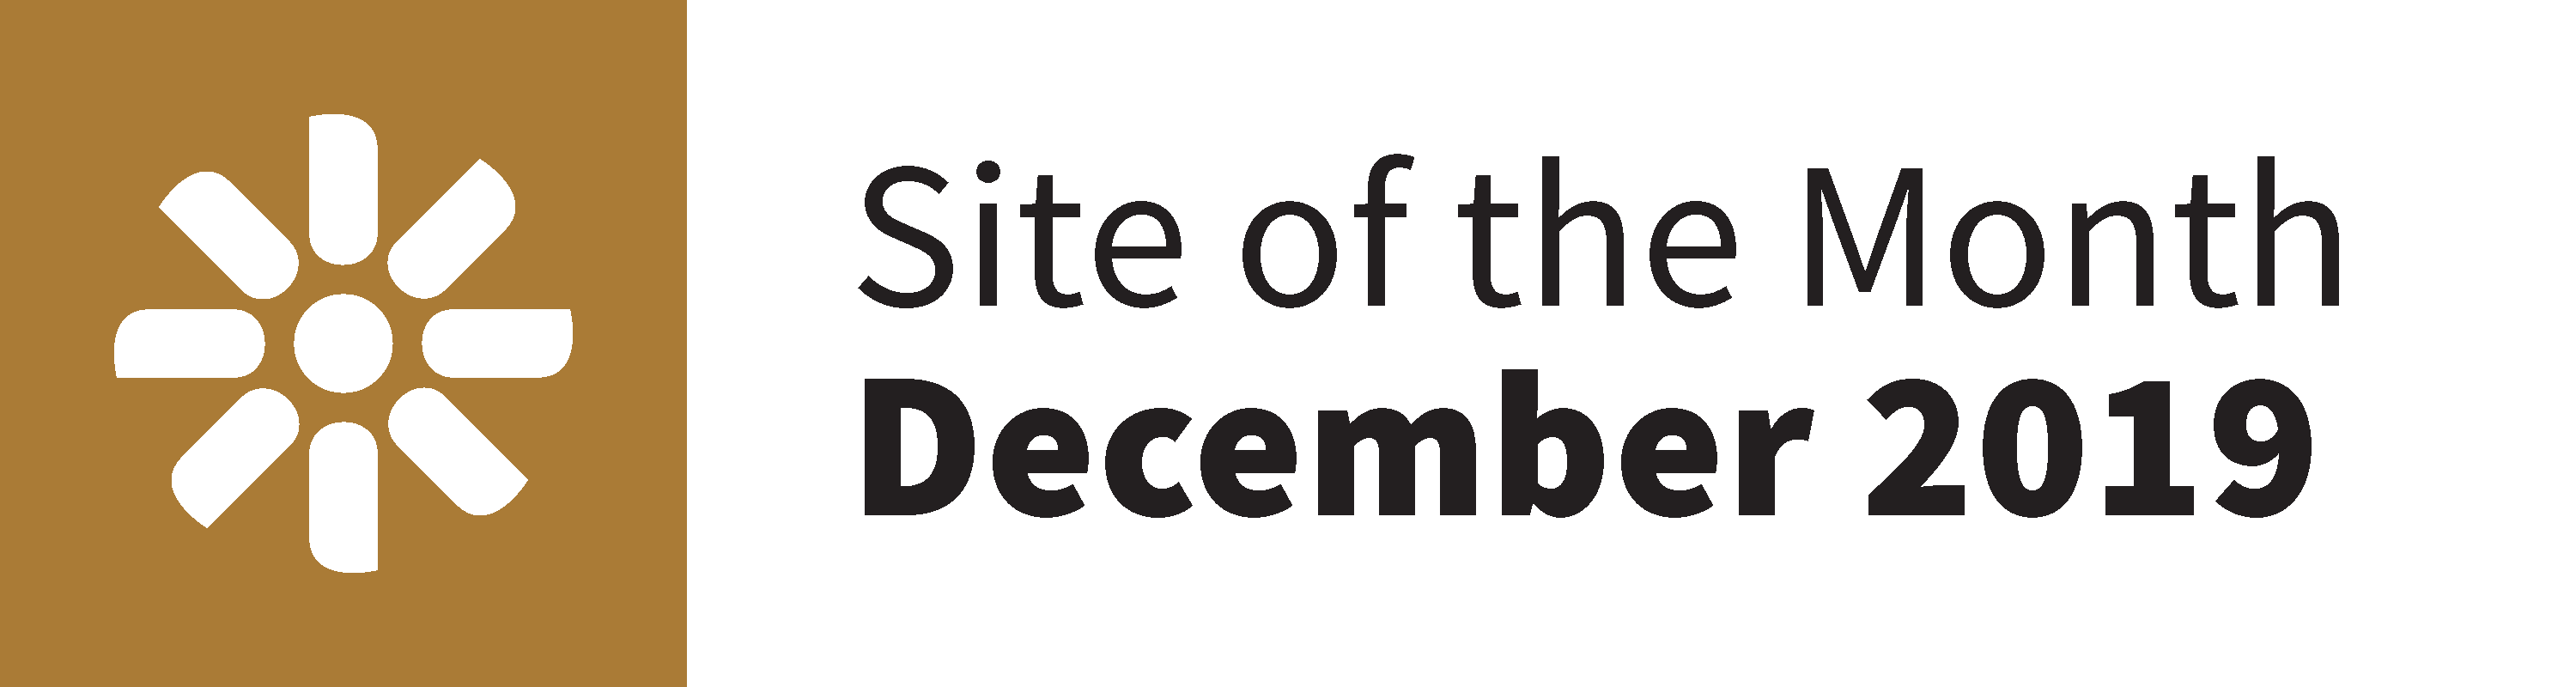 Kentico Site of the Month December 2019 badge